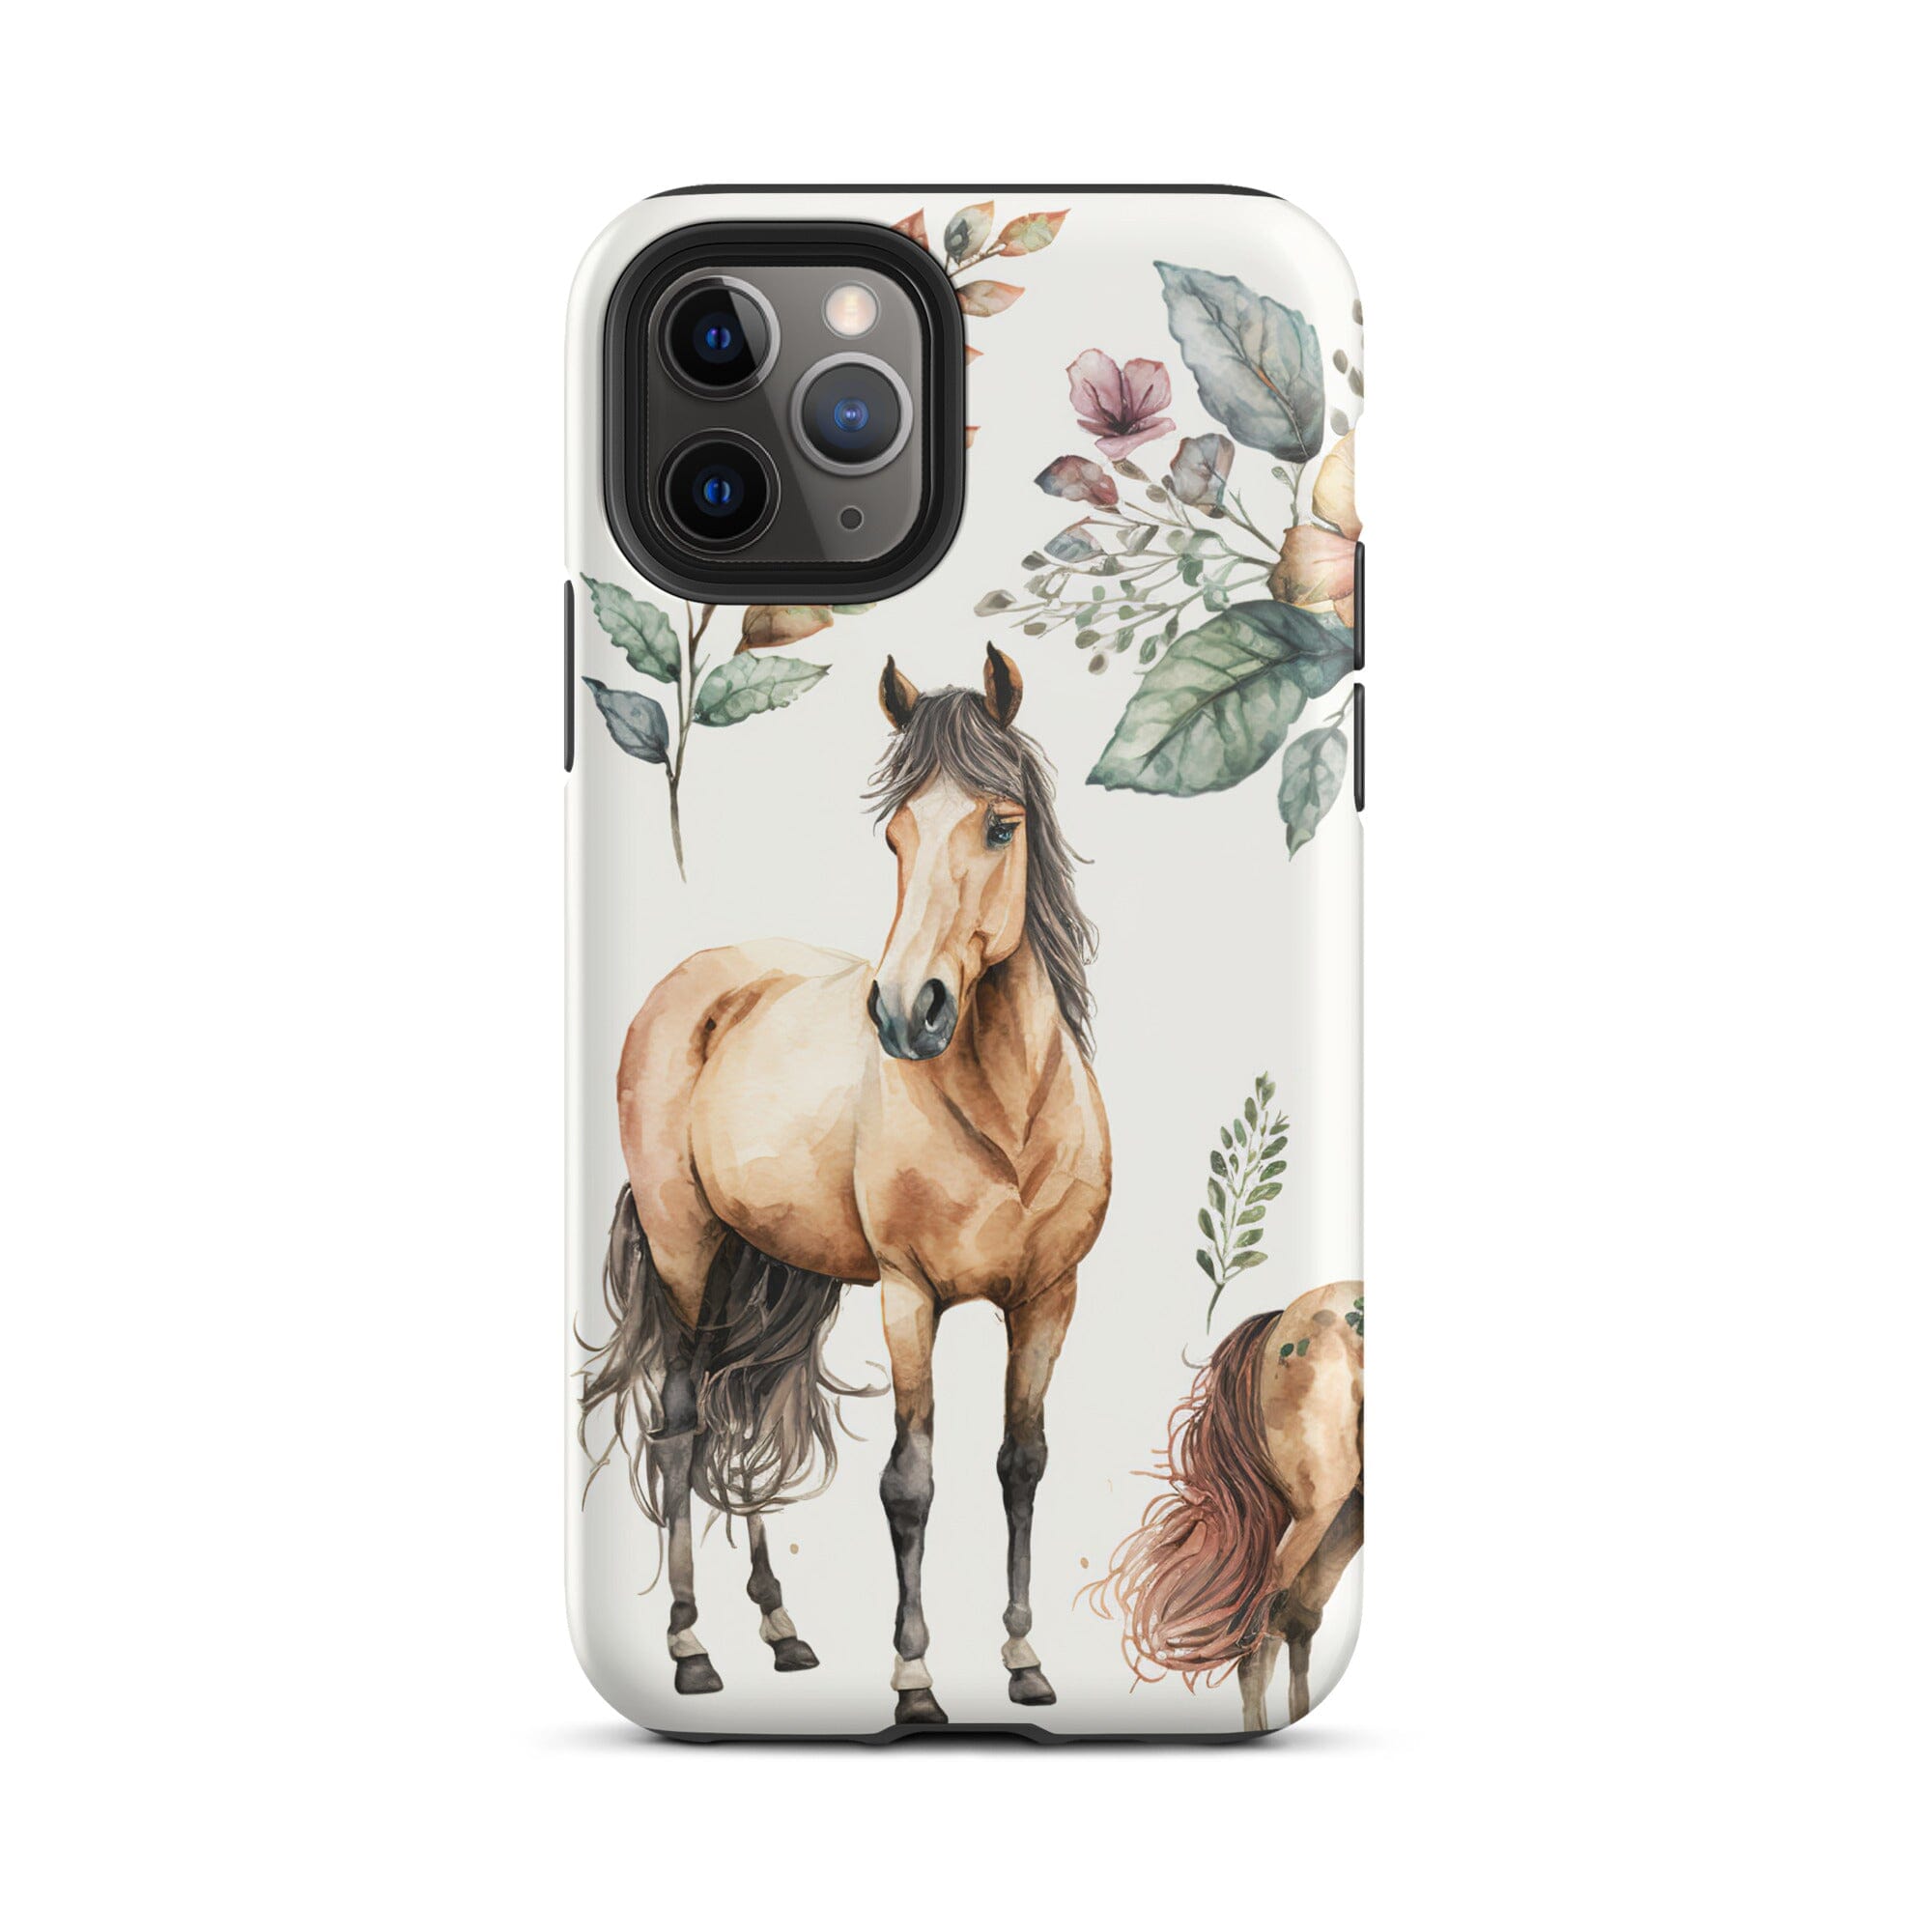 Watercolor Horse iPhone Case - KBB Exclusive Knitted Belle Boutique iPhone 11 